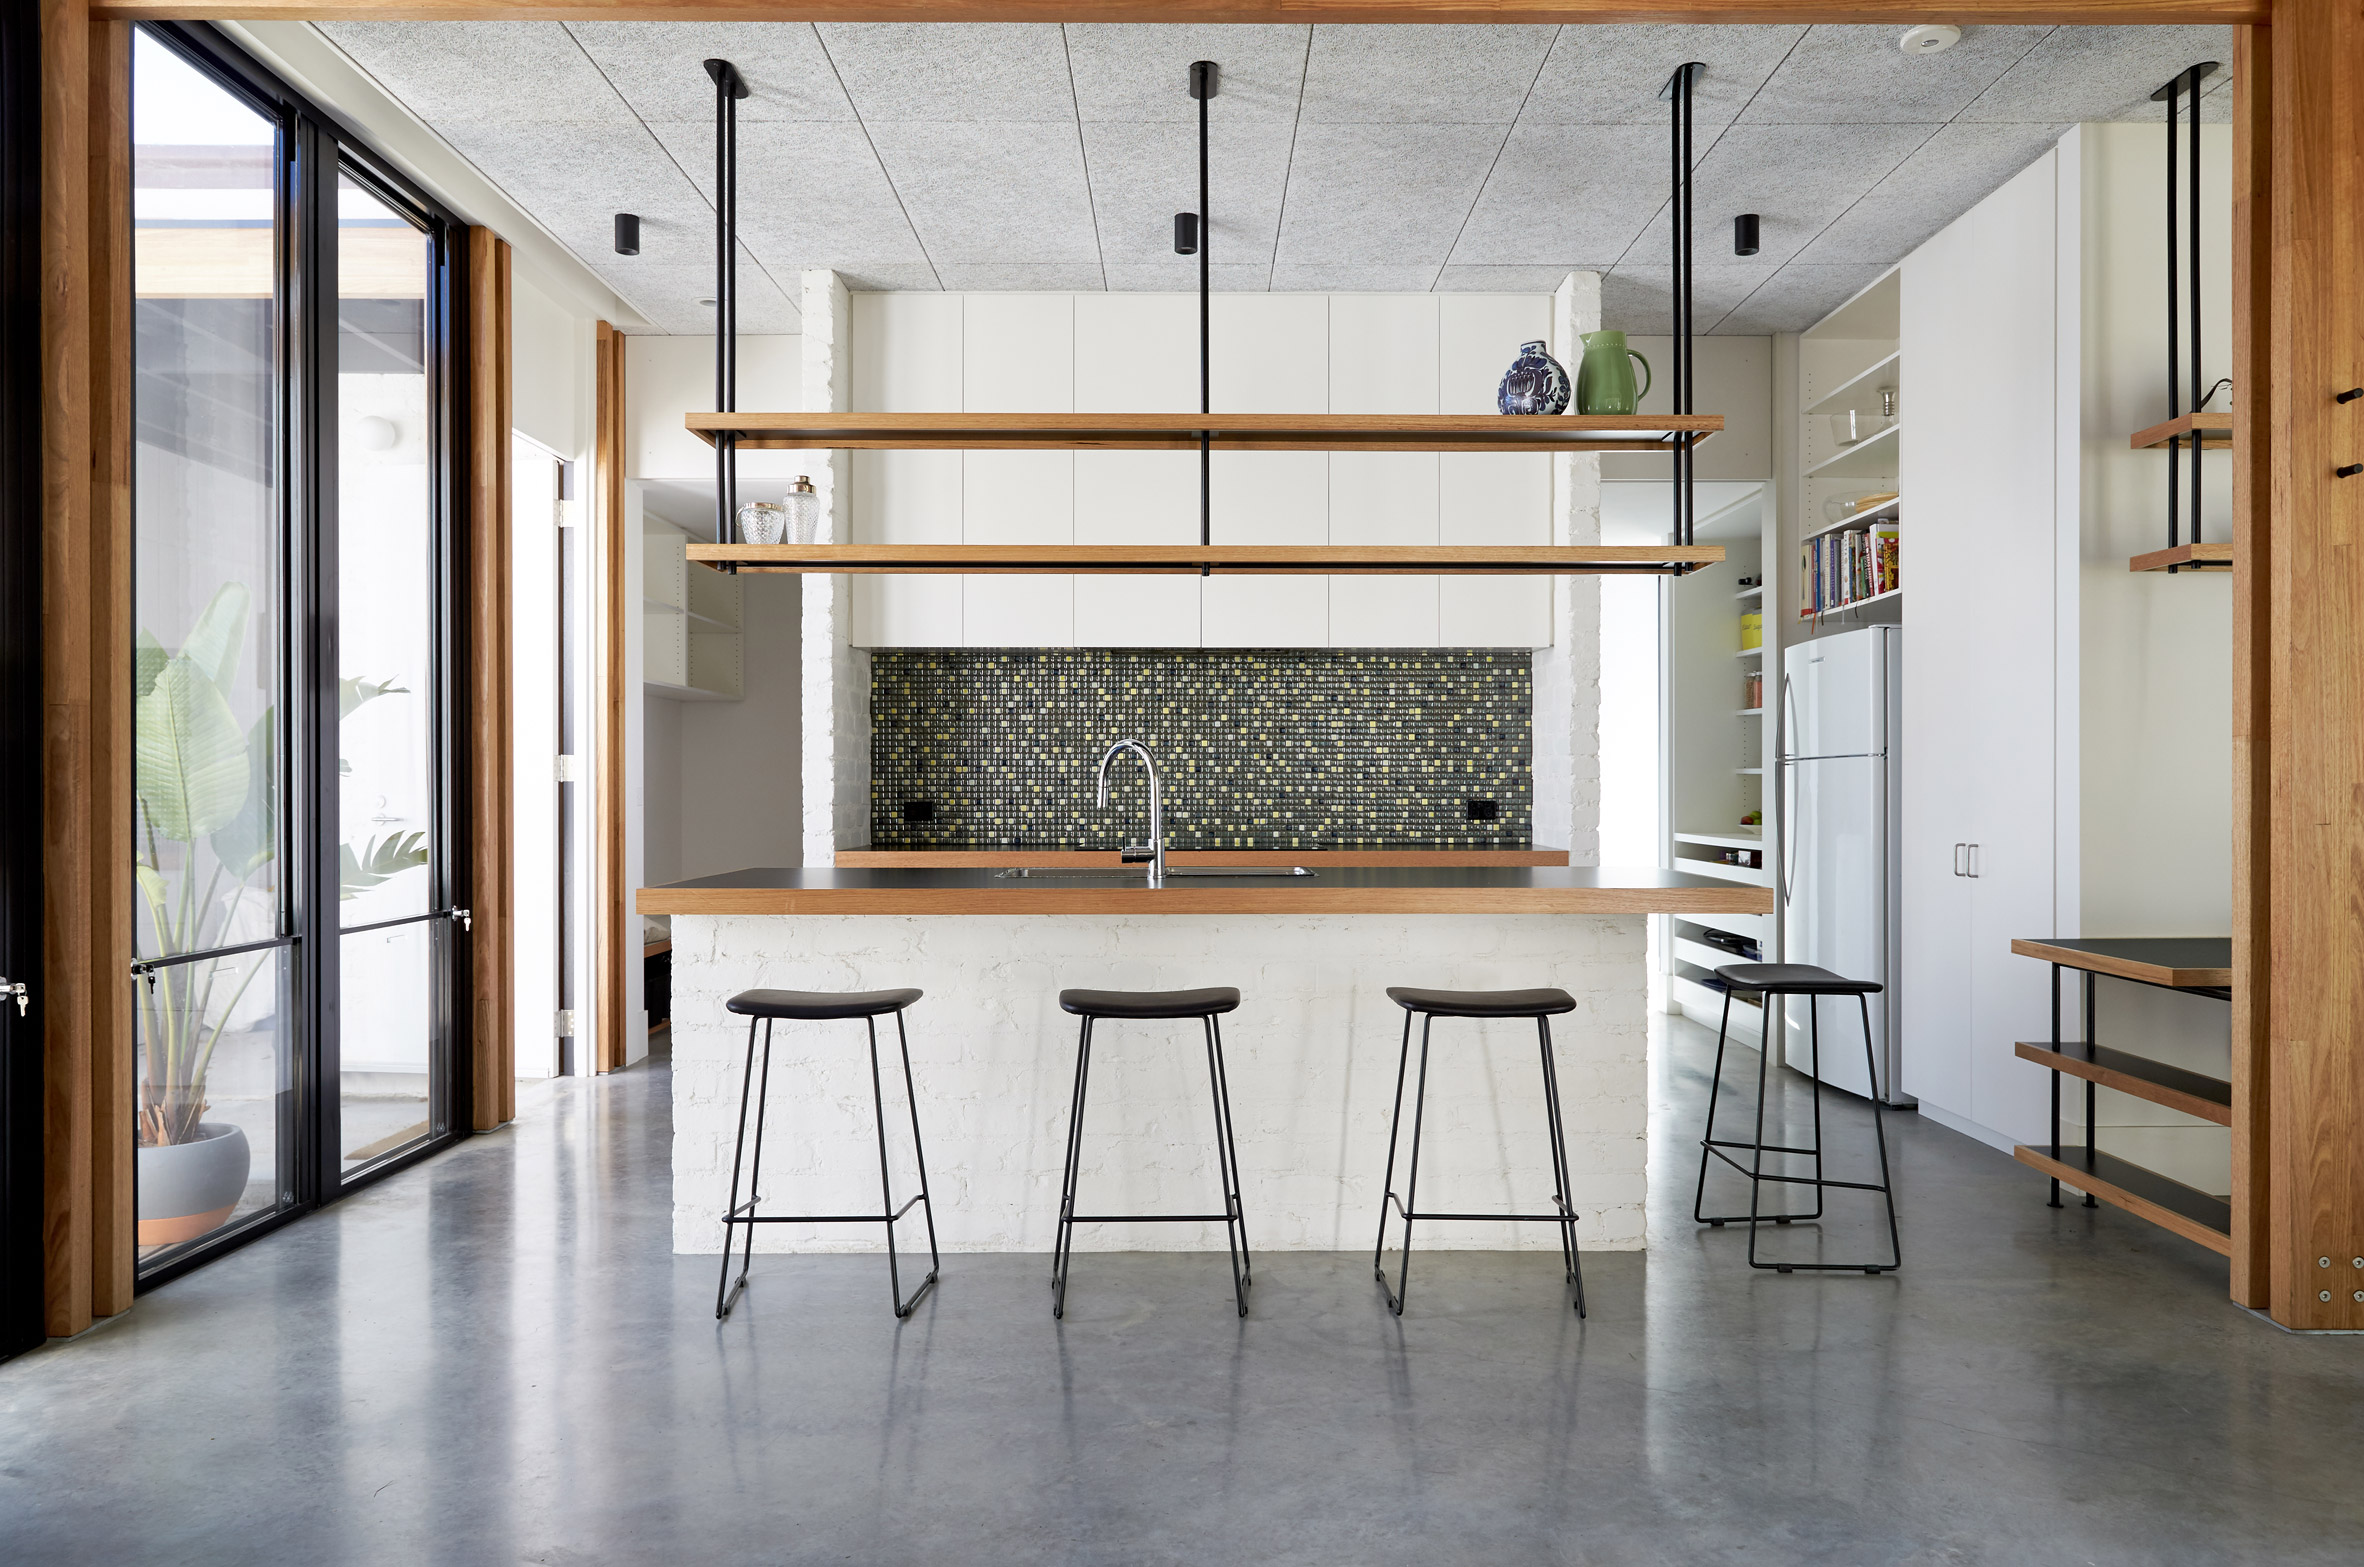 This single-storey house in Melbourne has been renovated by local studio Foomann to include exposed wooden beams that span the entirety of the property.